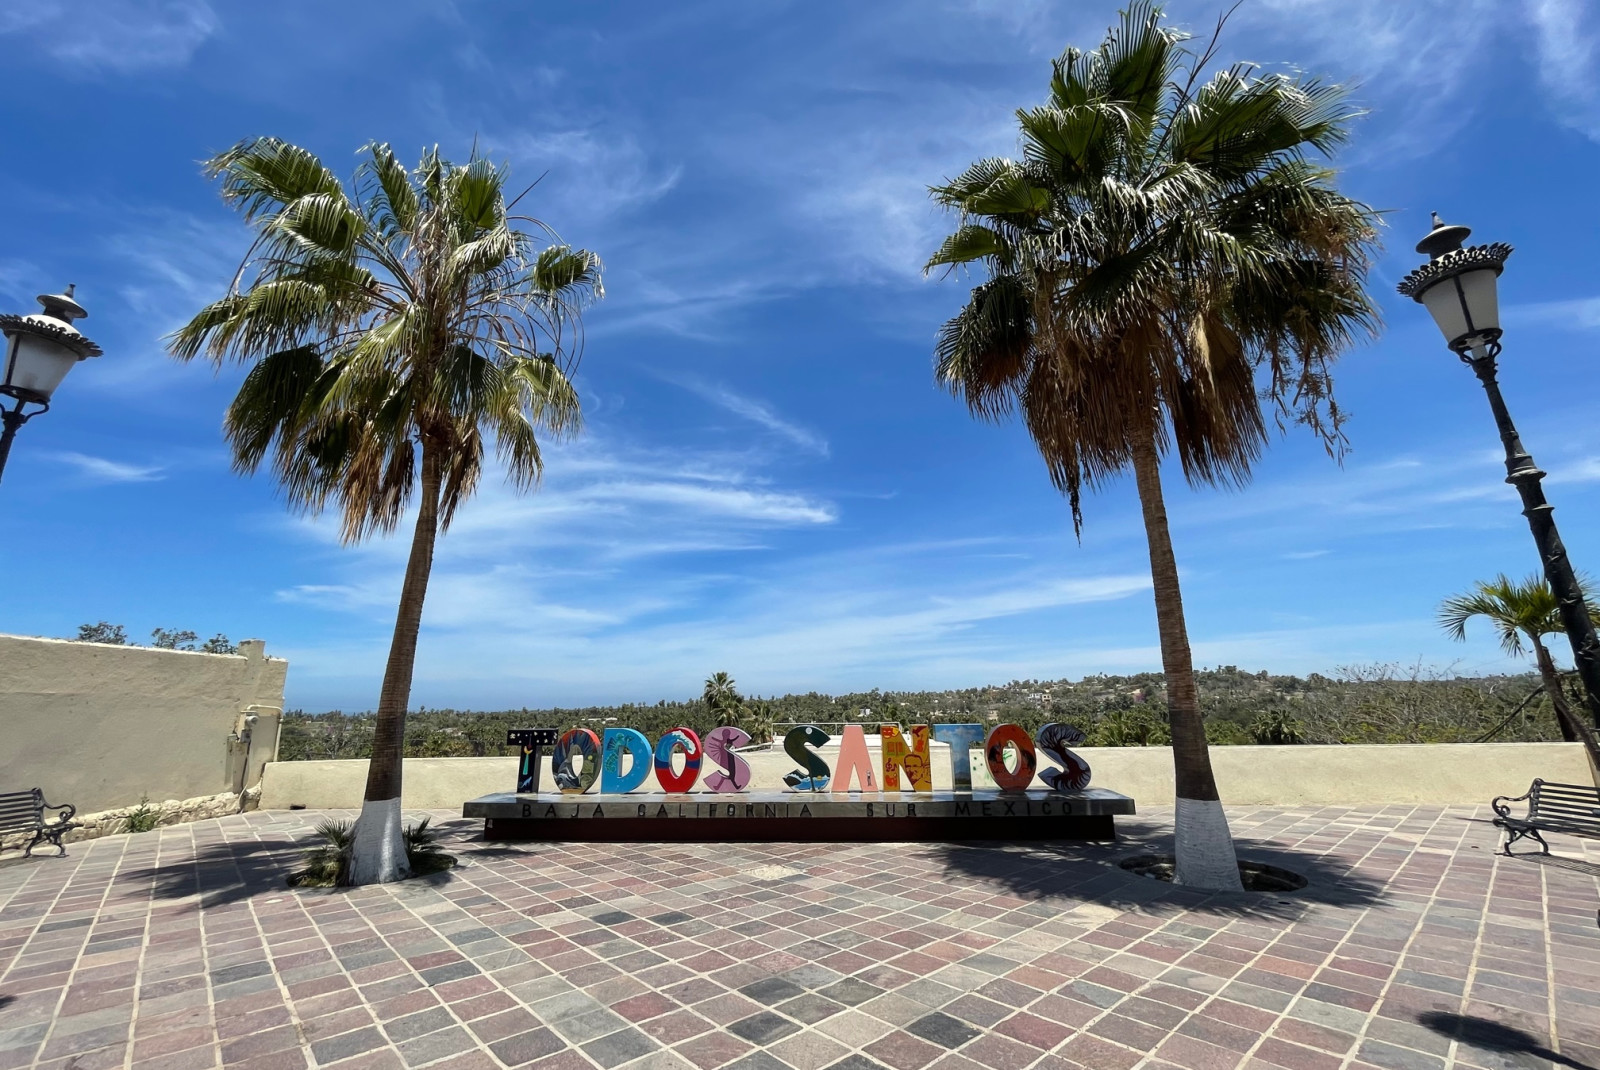 colorful sign that reads Todos Santos with two palm trees framing it